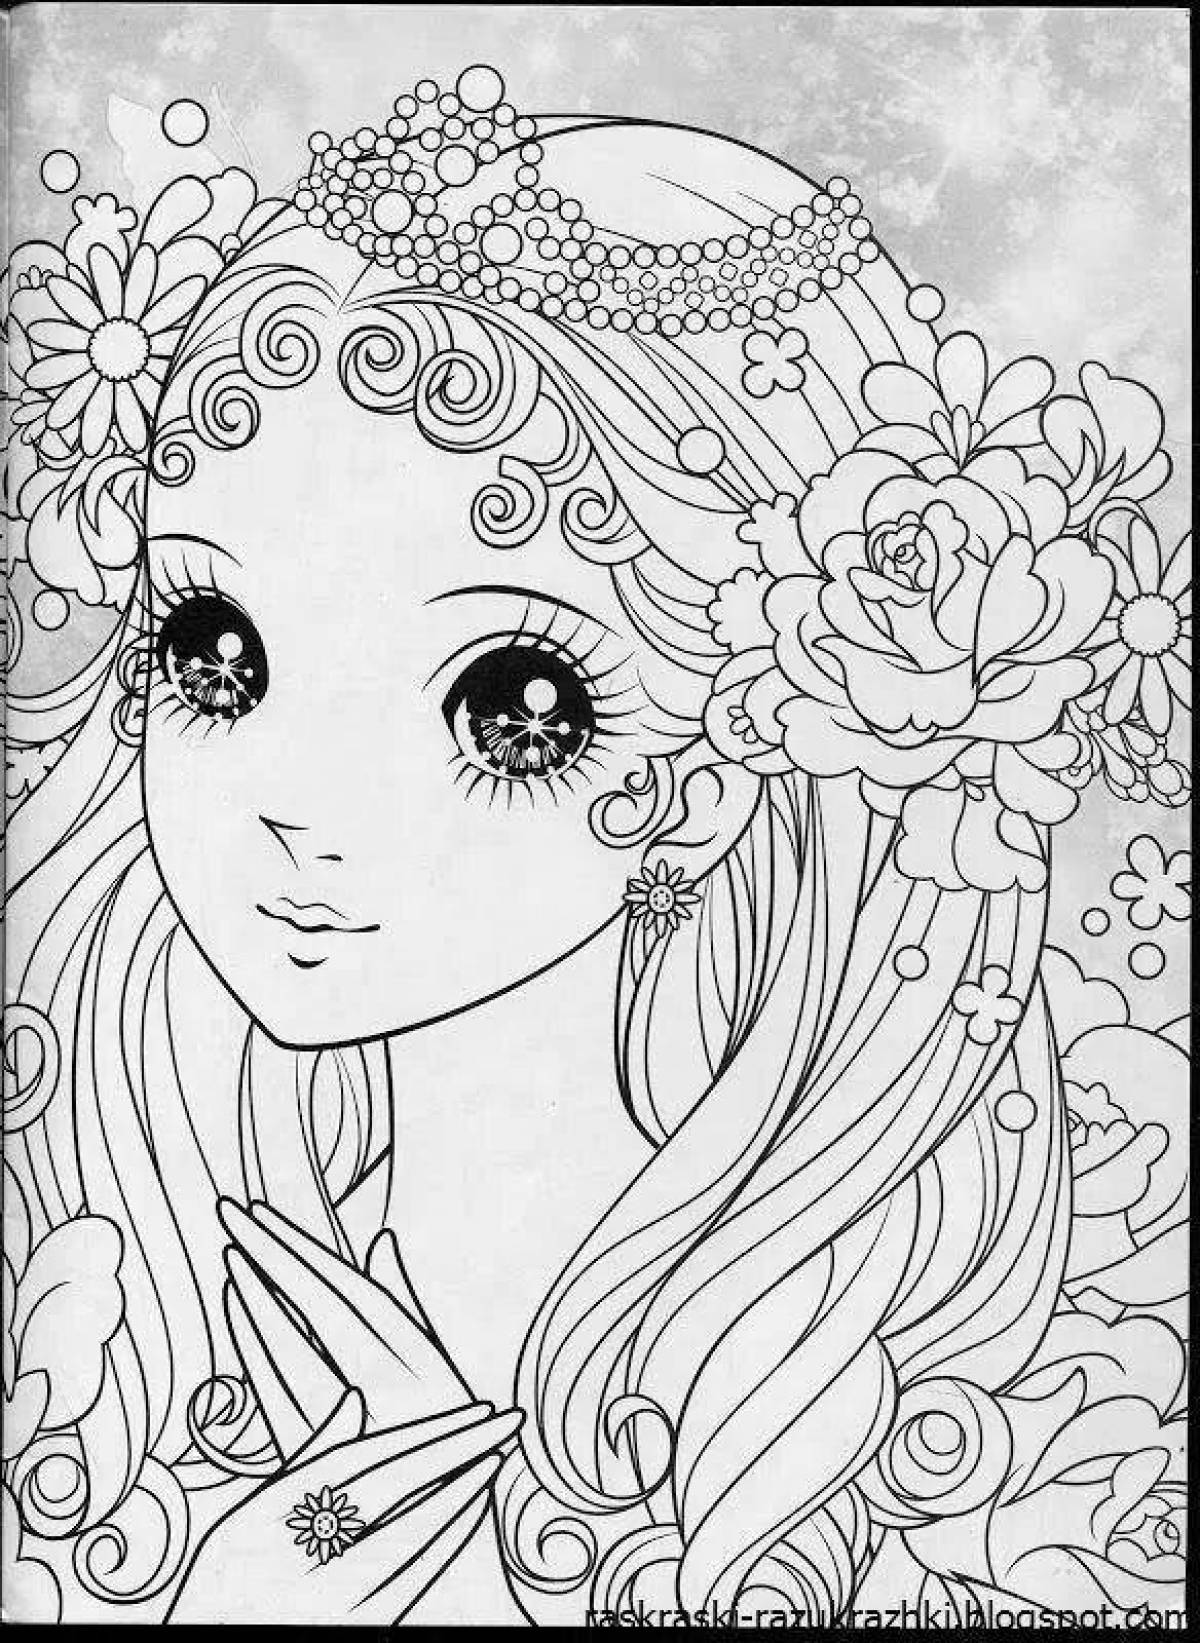 Exalted coloring page for girls 15 years old